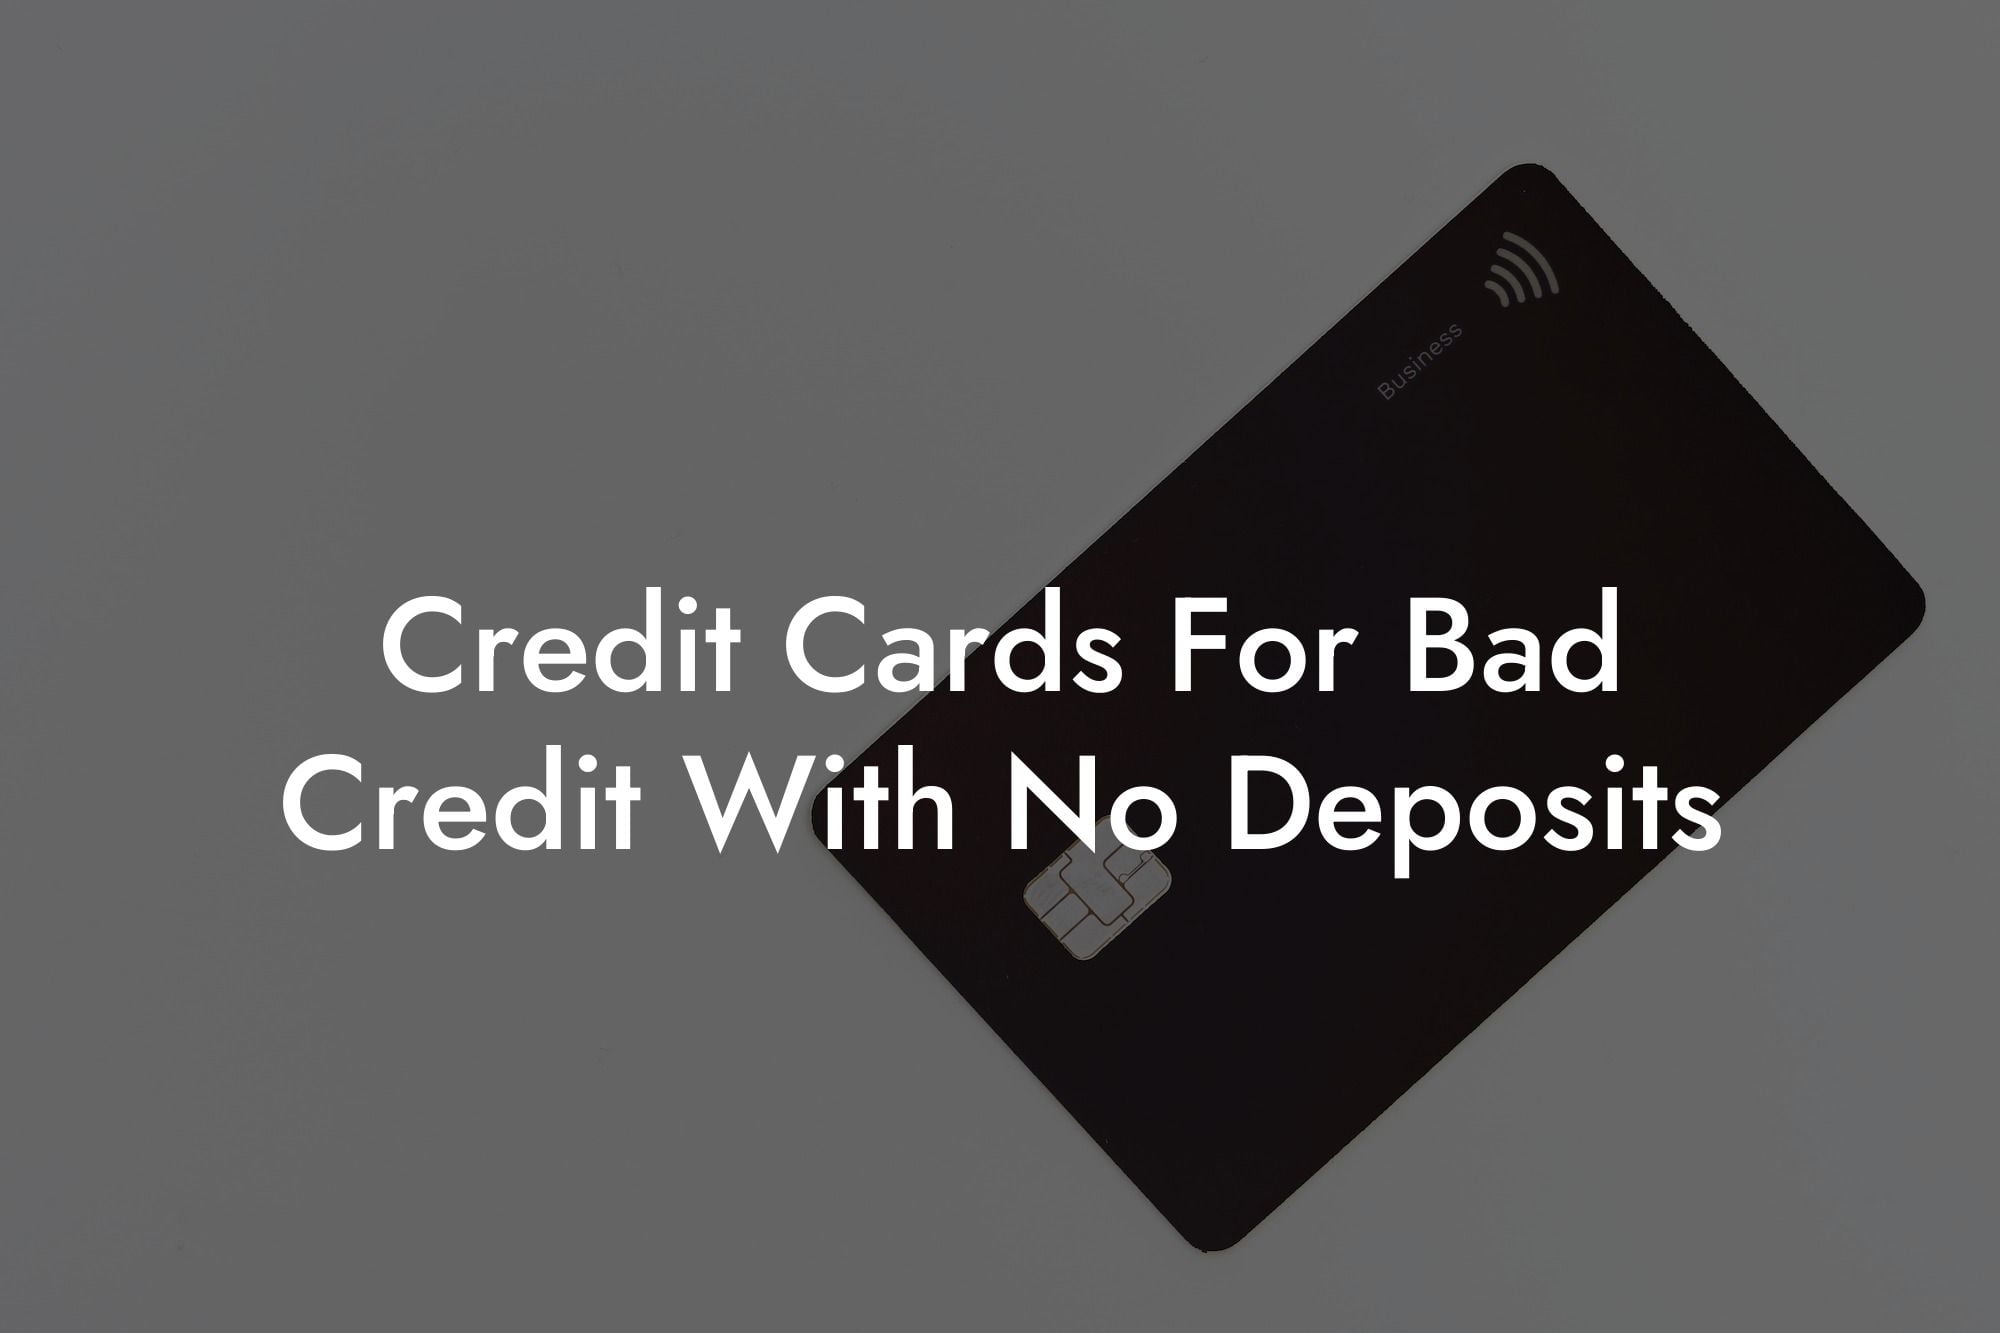 Credit Cards For Bad Credit With No Deposits